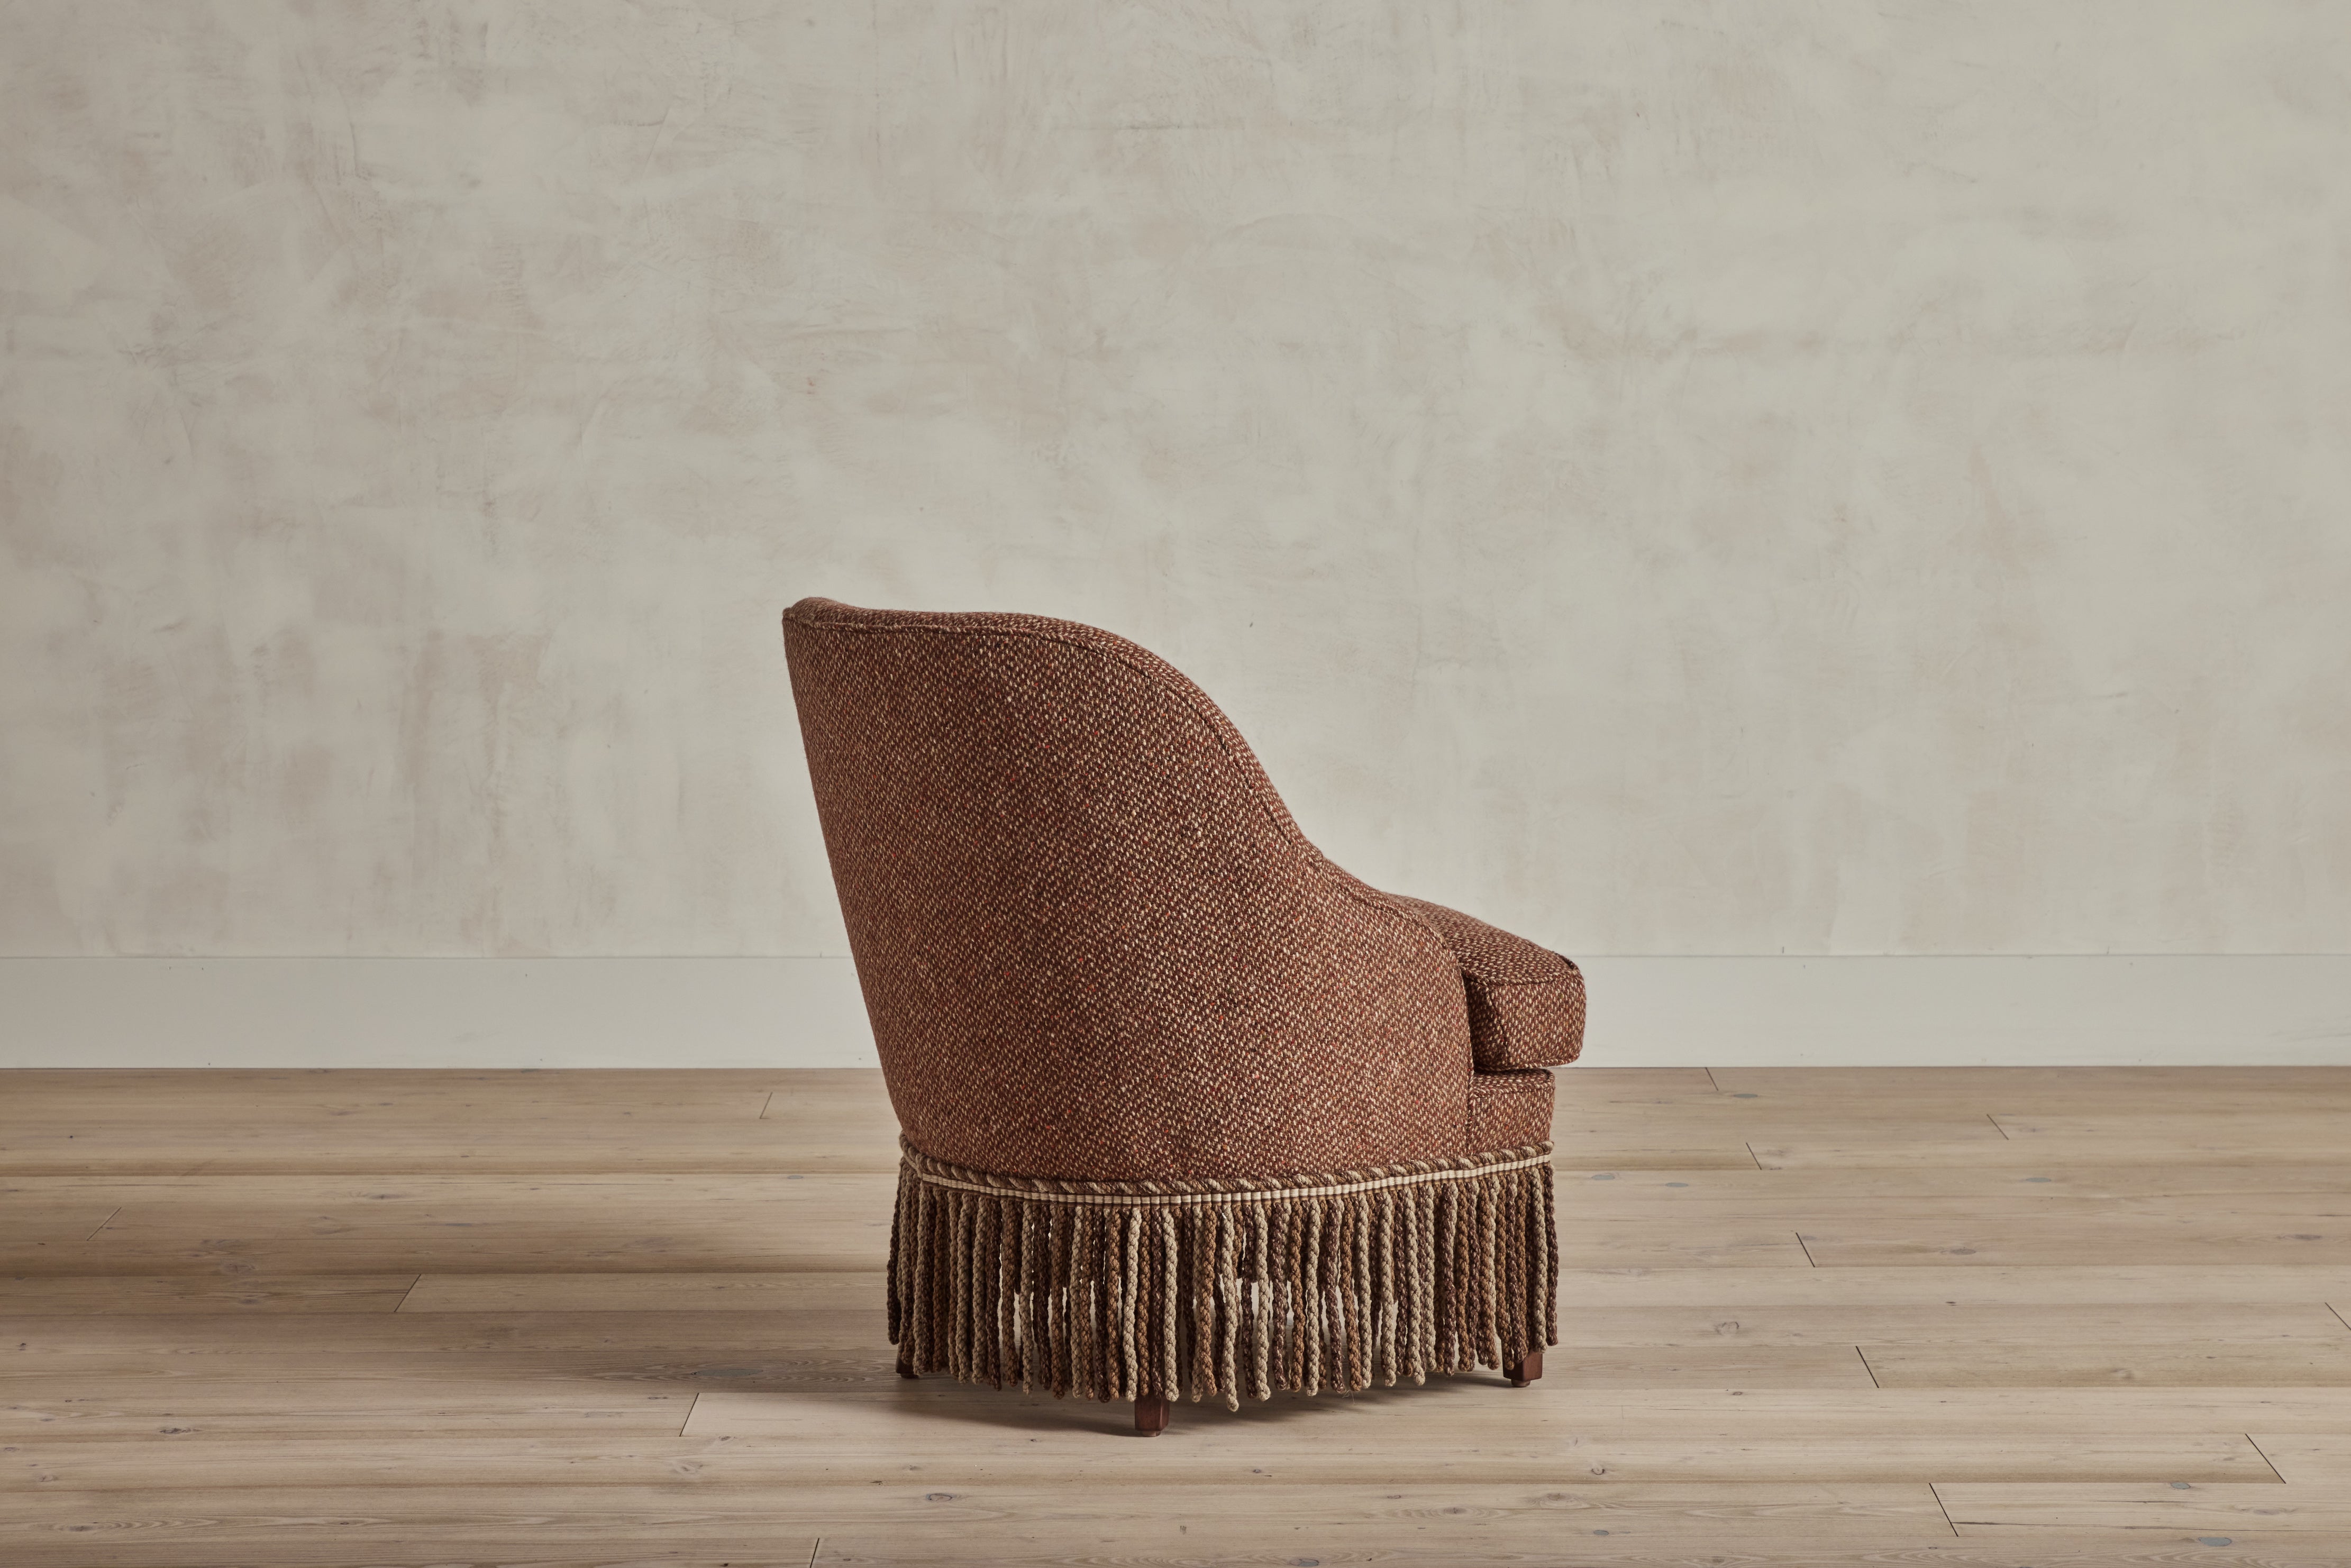 Nickey Kehoe Fireplace Pull Up Chair - In Stock